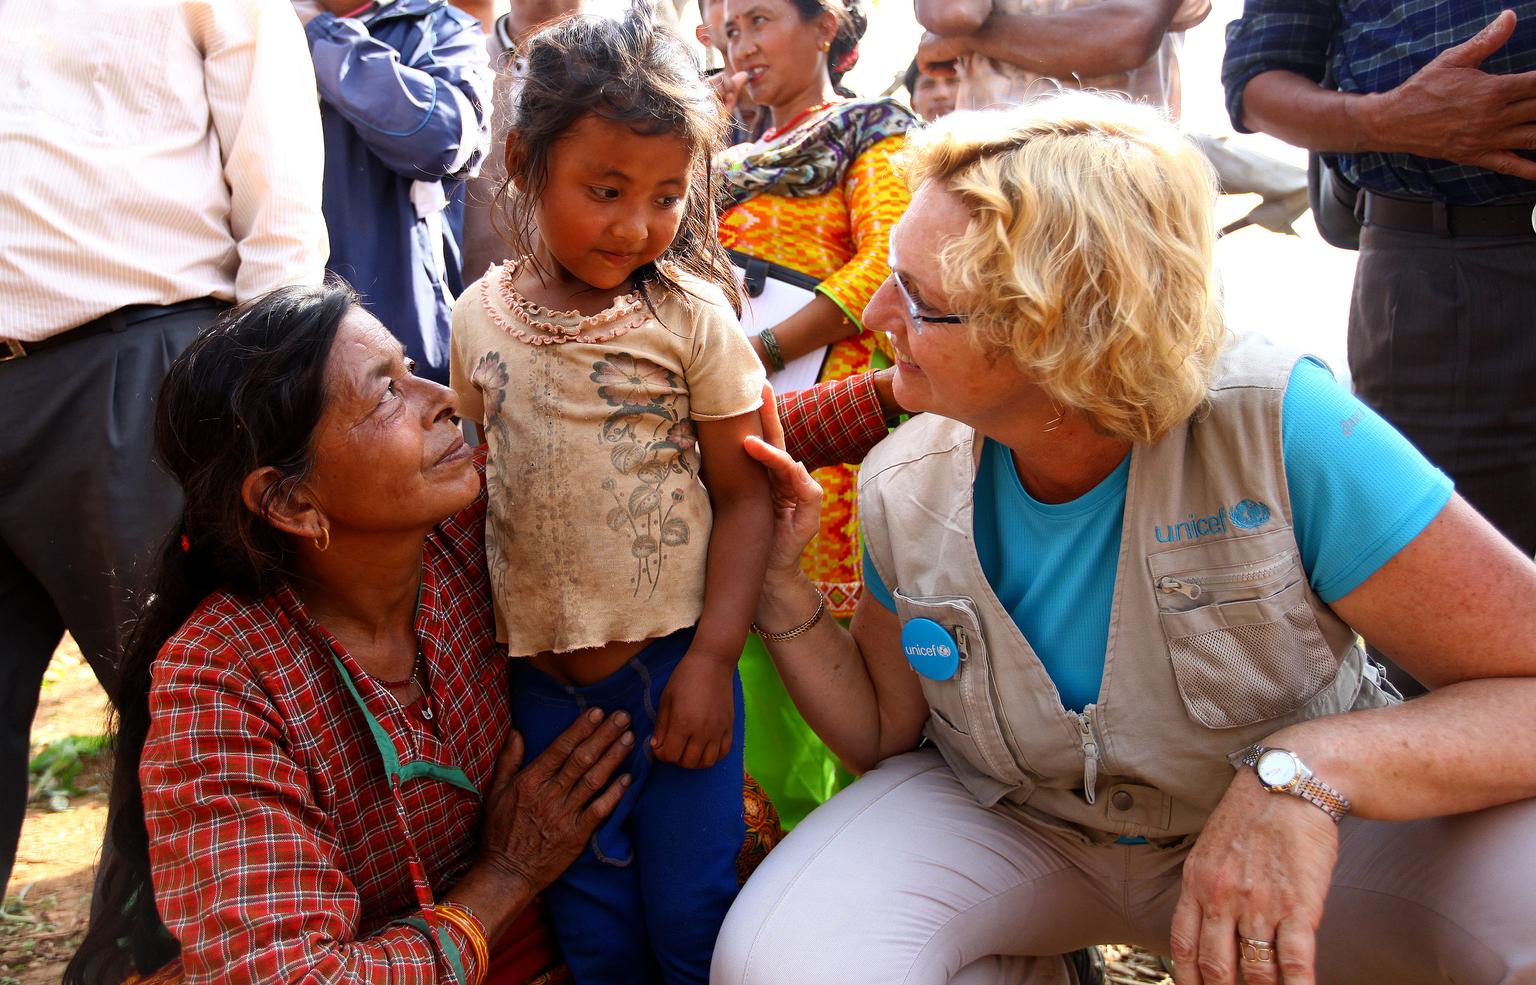 A young girl and her mother speak with UNICEF South Asia Regional Director Karin Hulshof. © UNICEF/NYHQ2015-1097/Panday